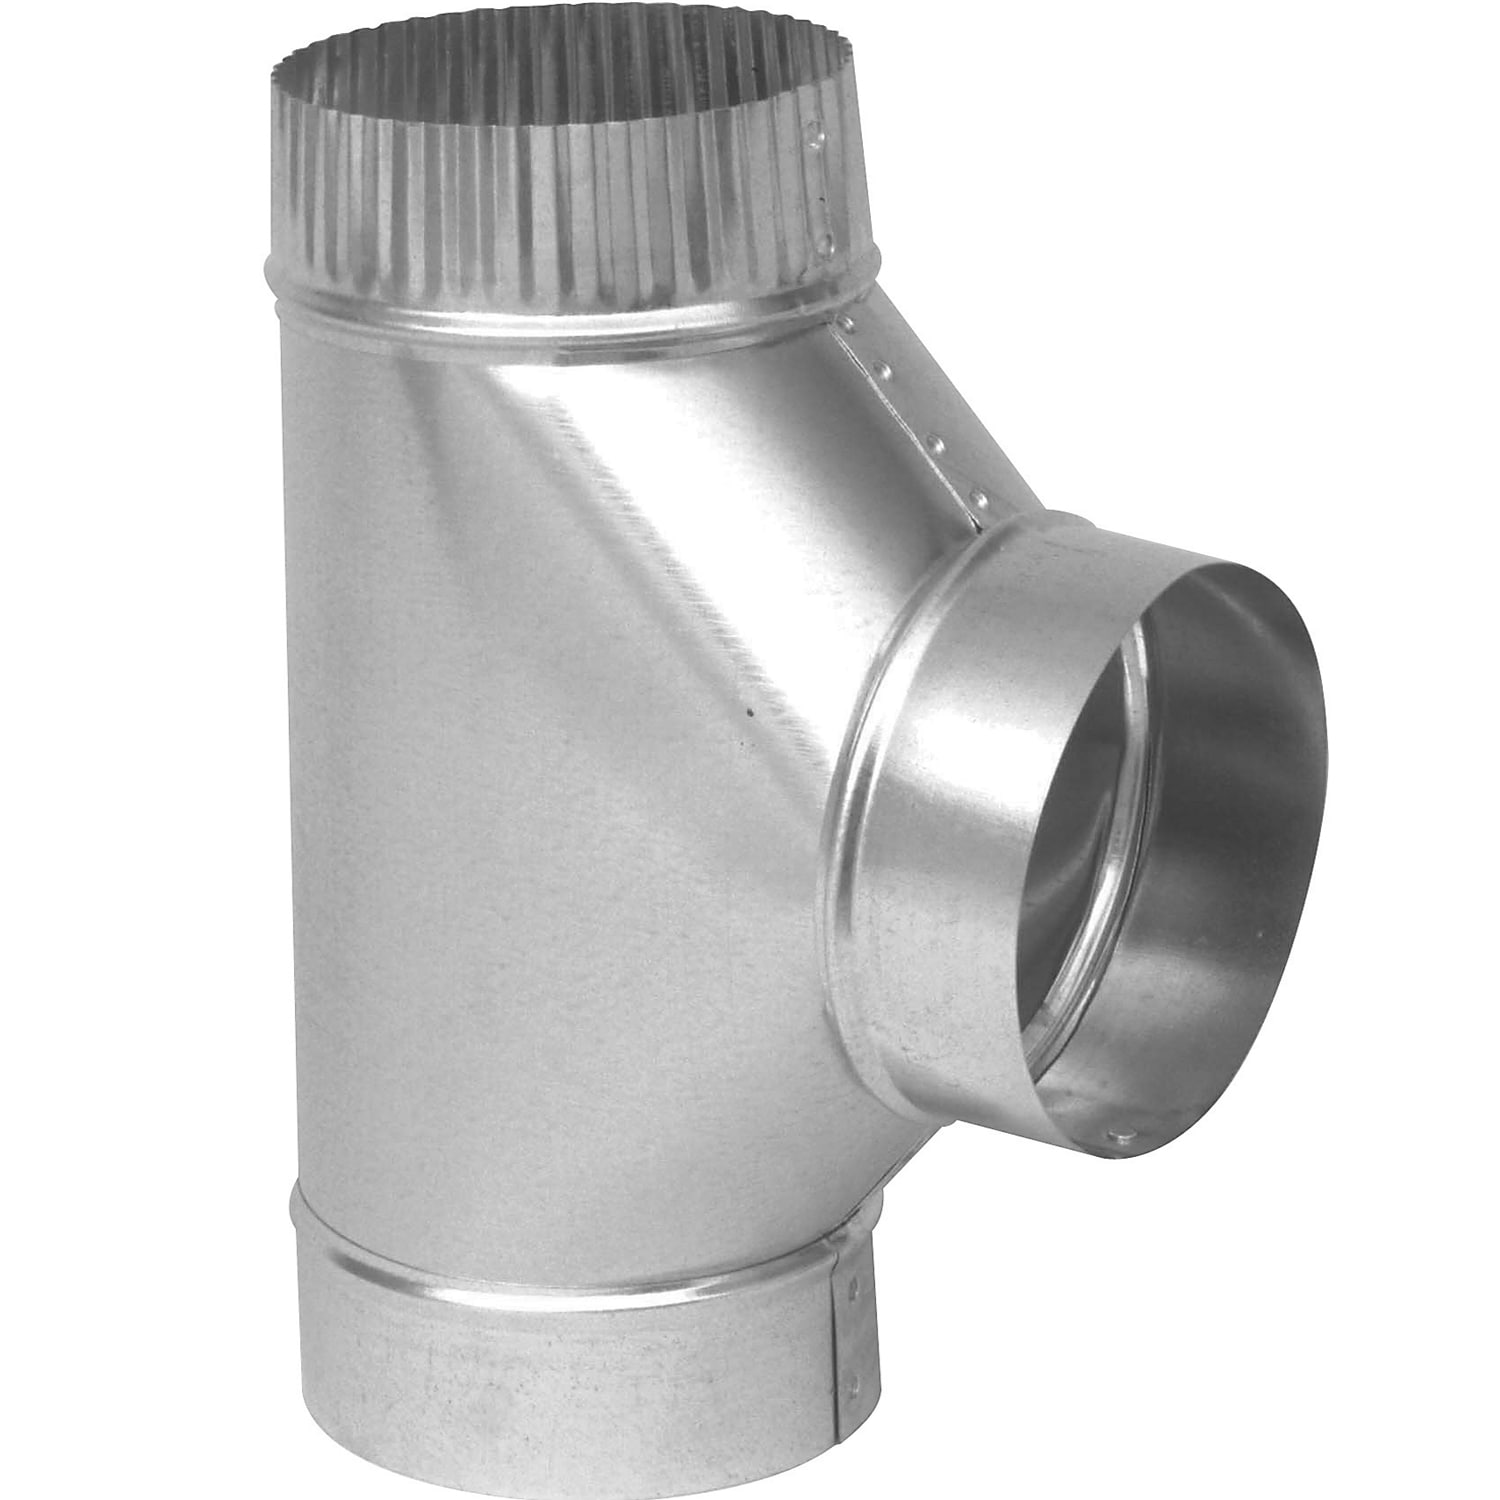 IMPERIAL 4-in x 4-in Galvanized Steel Round Full Flow Duct Tee in